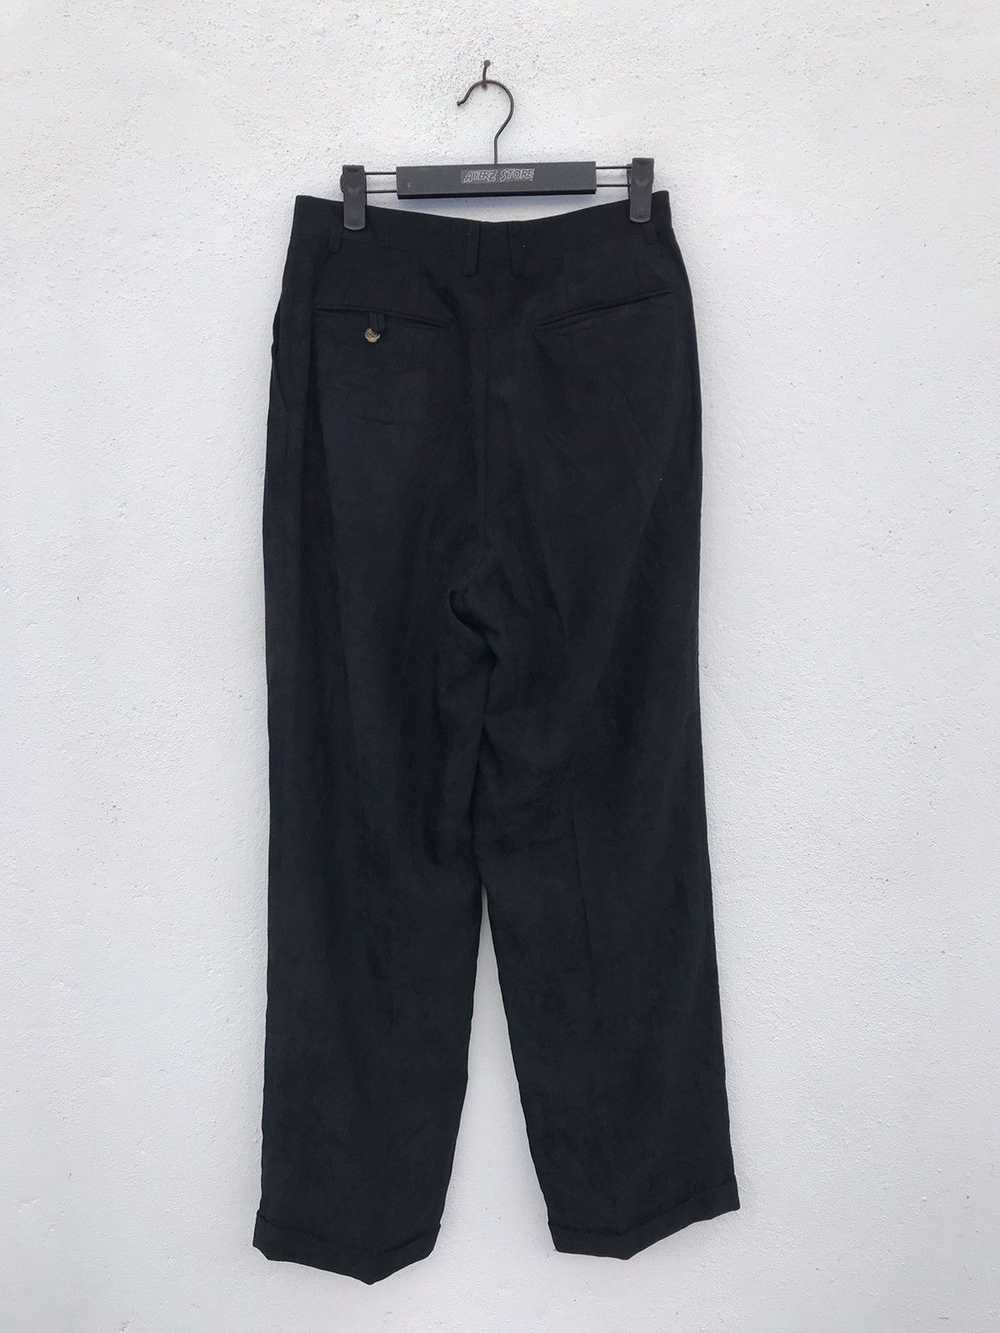 Japanese Brand Marie Claire Corduroy Pants - image 5